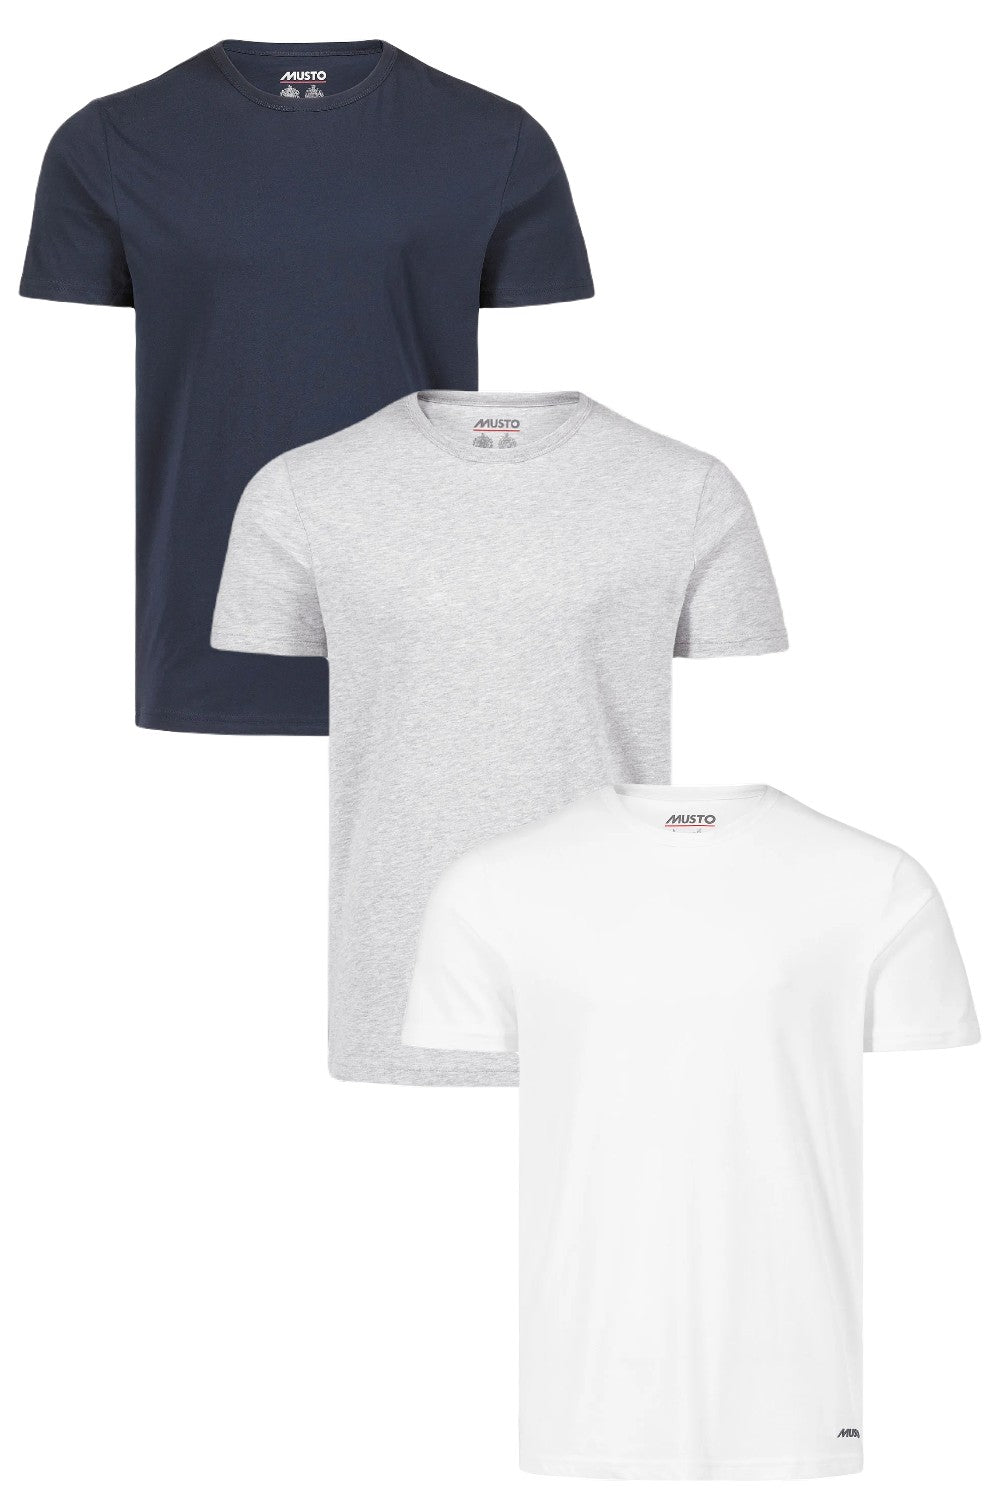 Musto Mens Essentials T-Shirt In Navy, Grey Melange and White